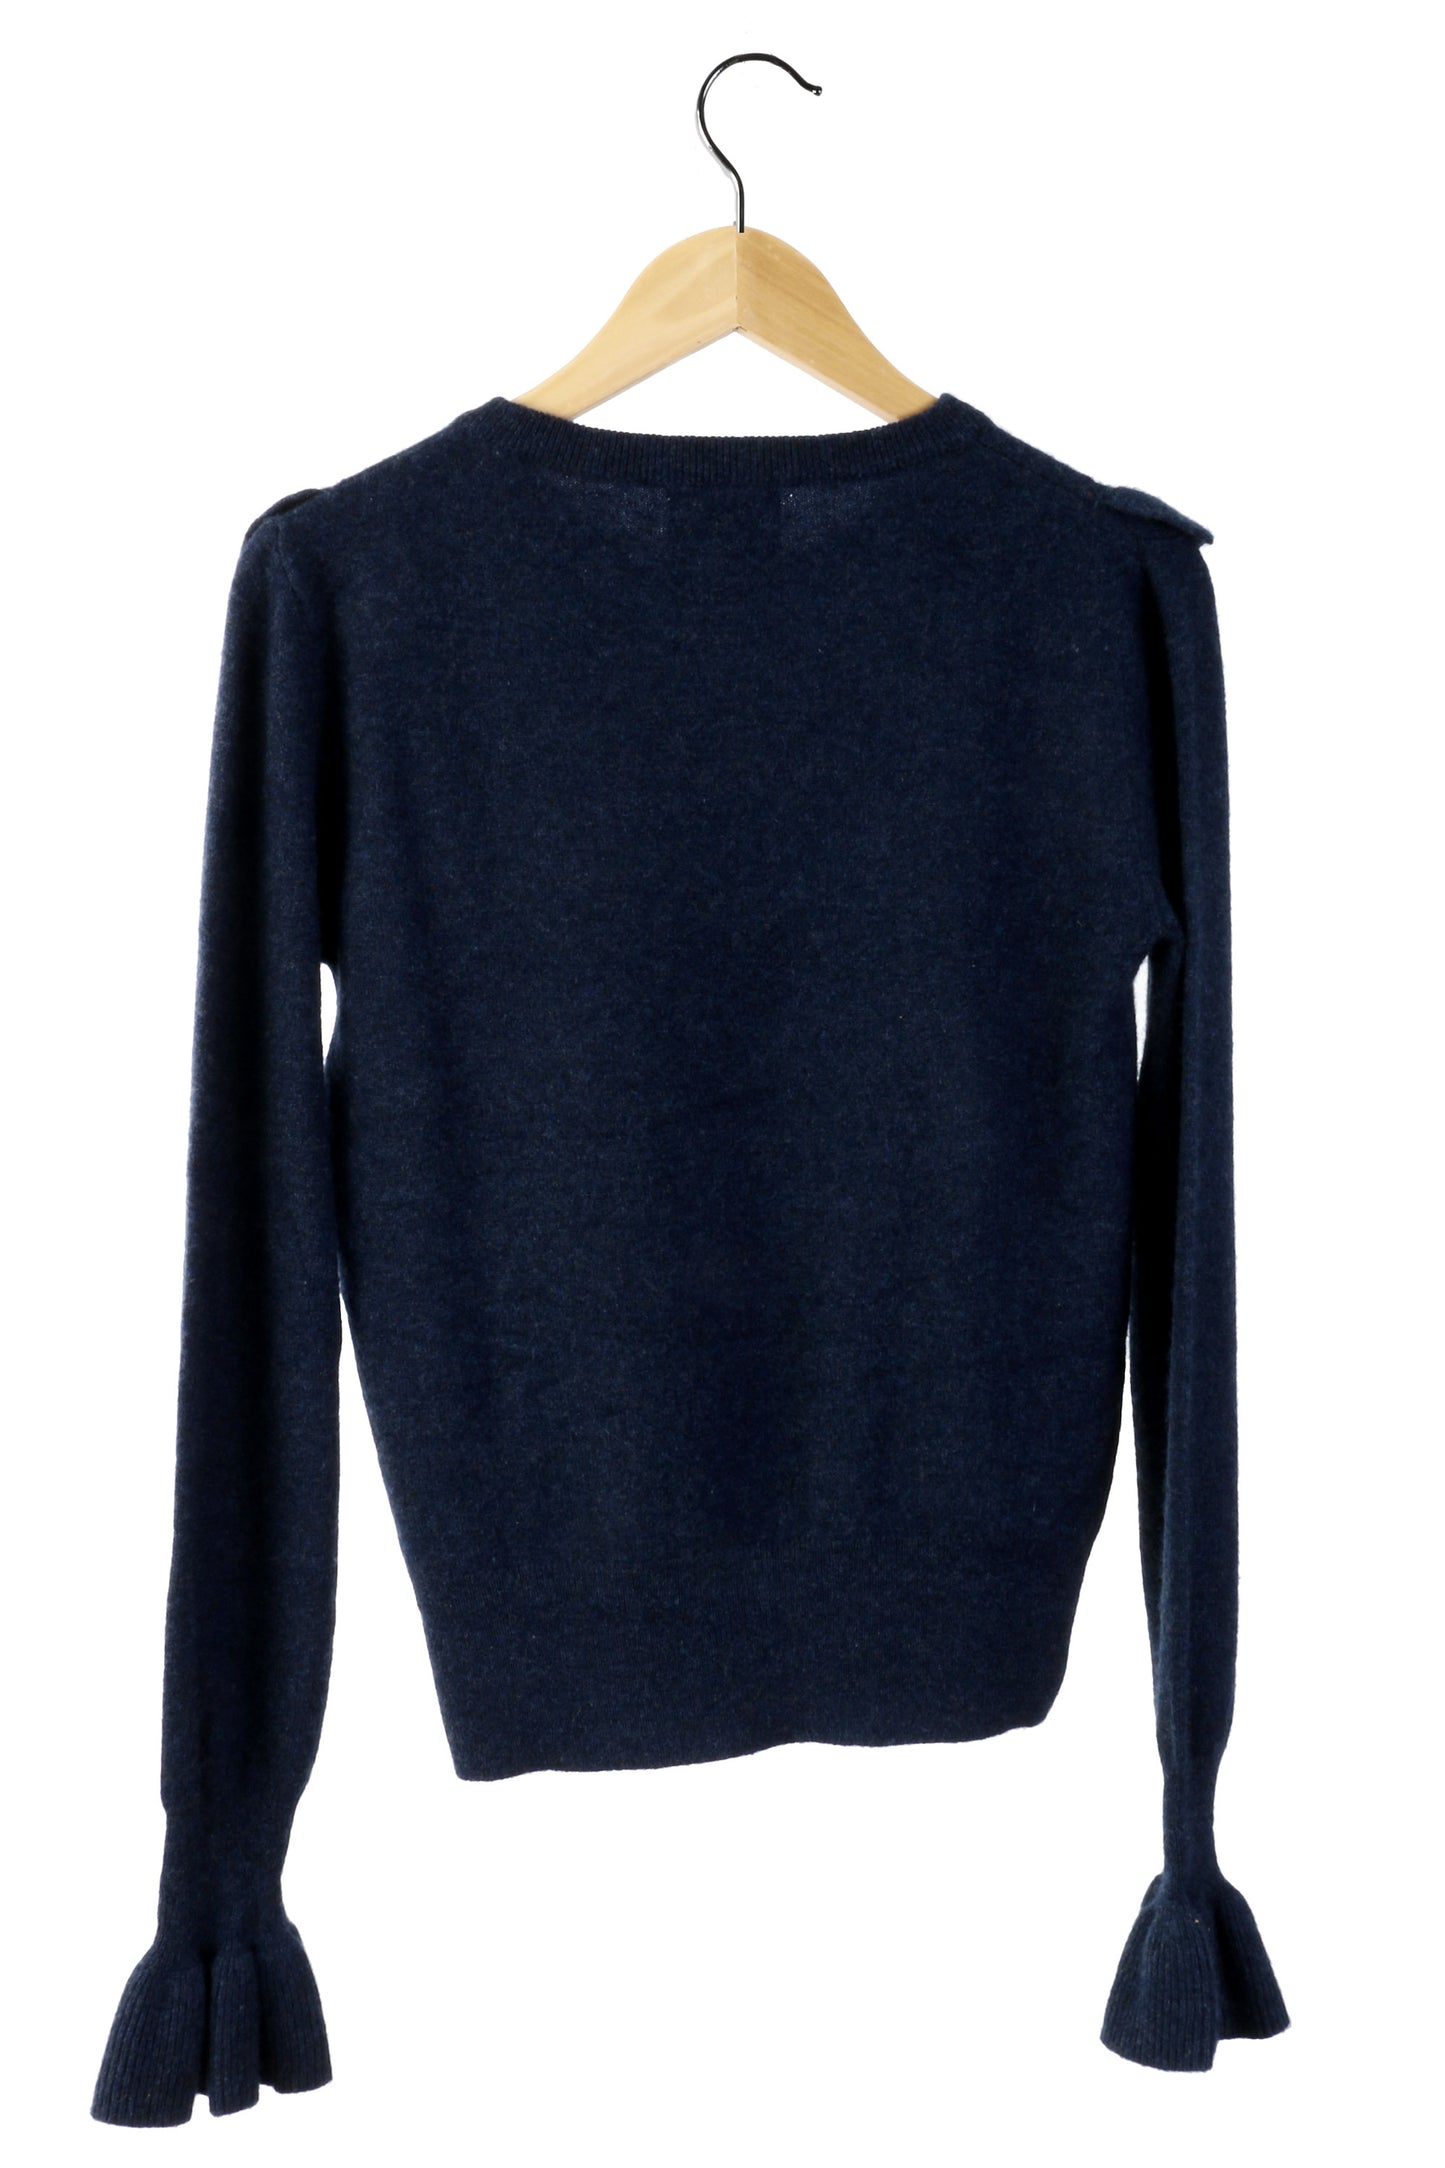 100% Cashmere Navy Frill Sweater Small